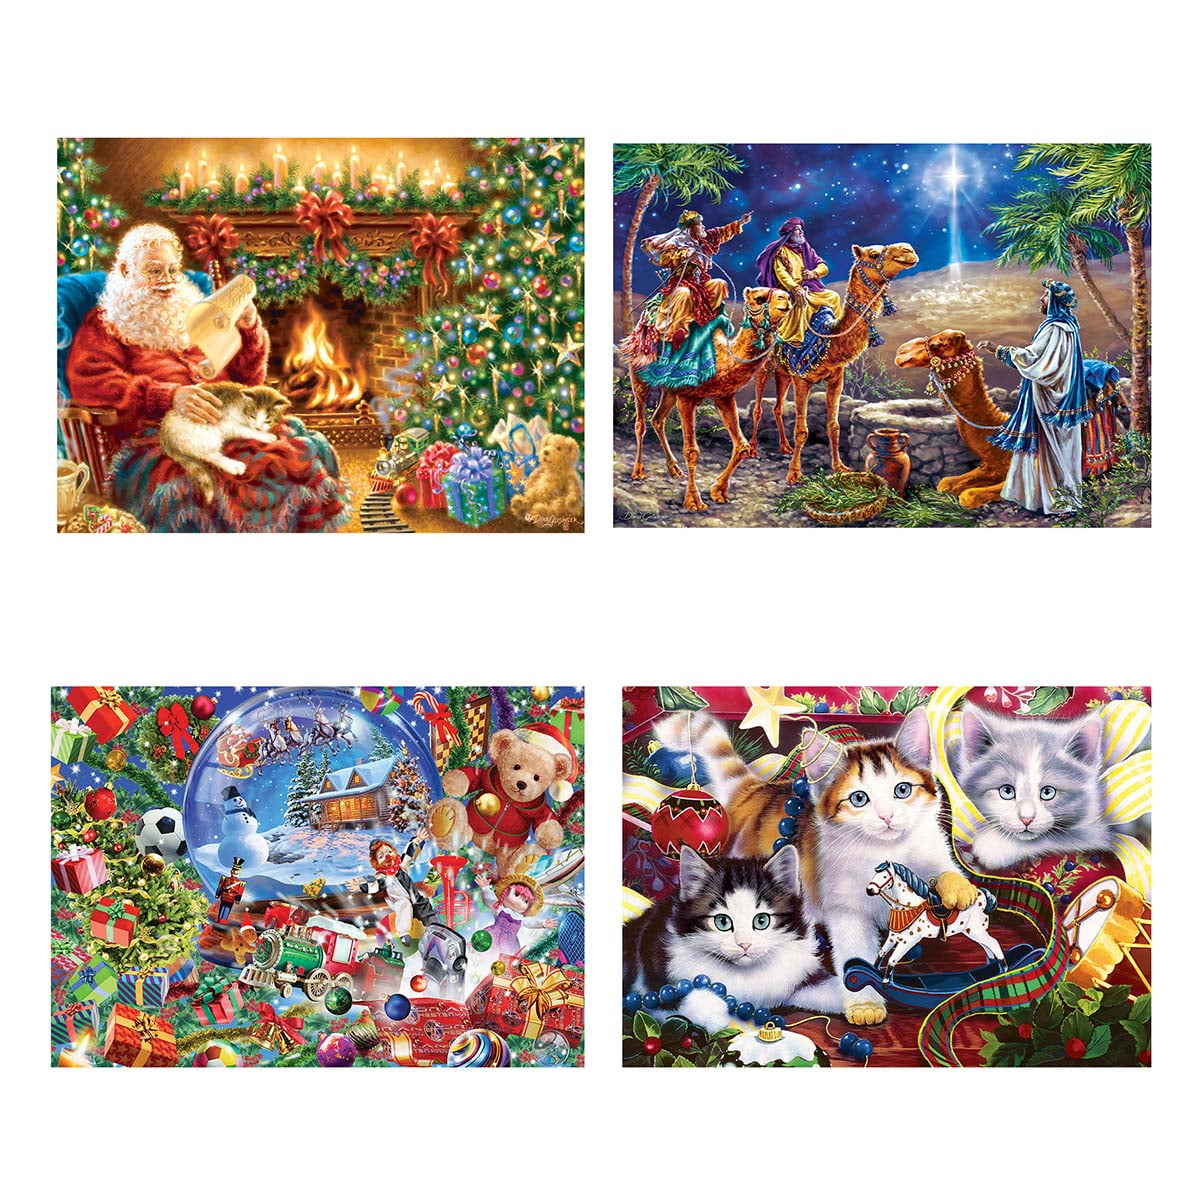 Masterpieces Puzzle Co Glitter Christmas Puzzles, Set of 4 Jigsaw ...